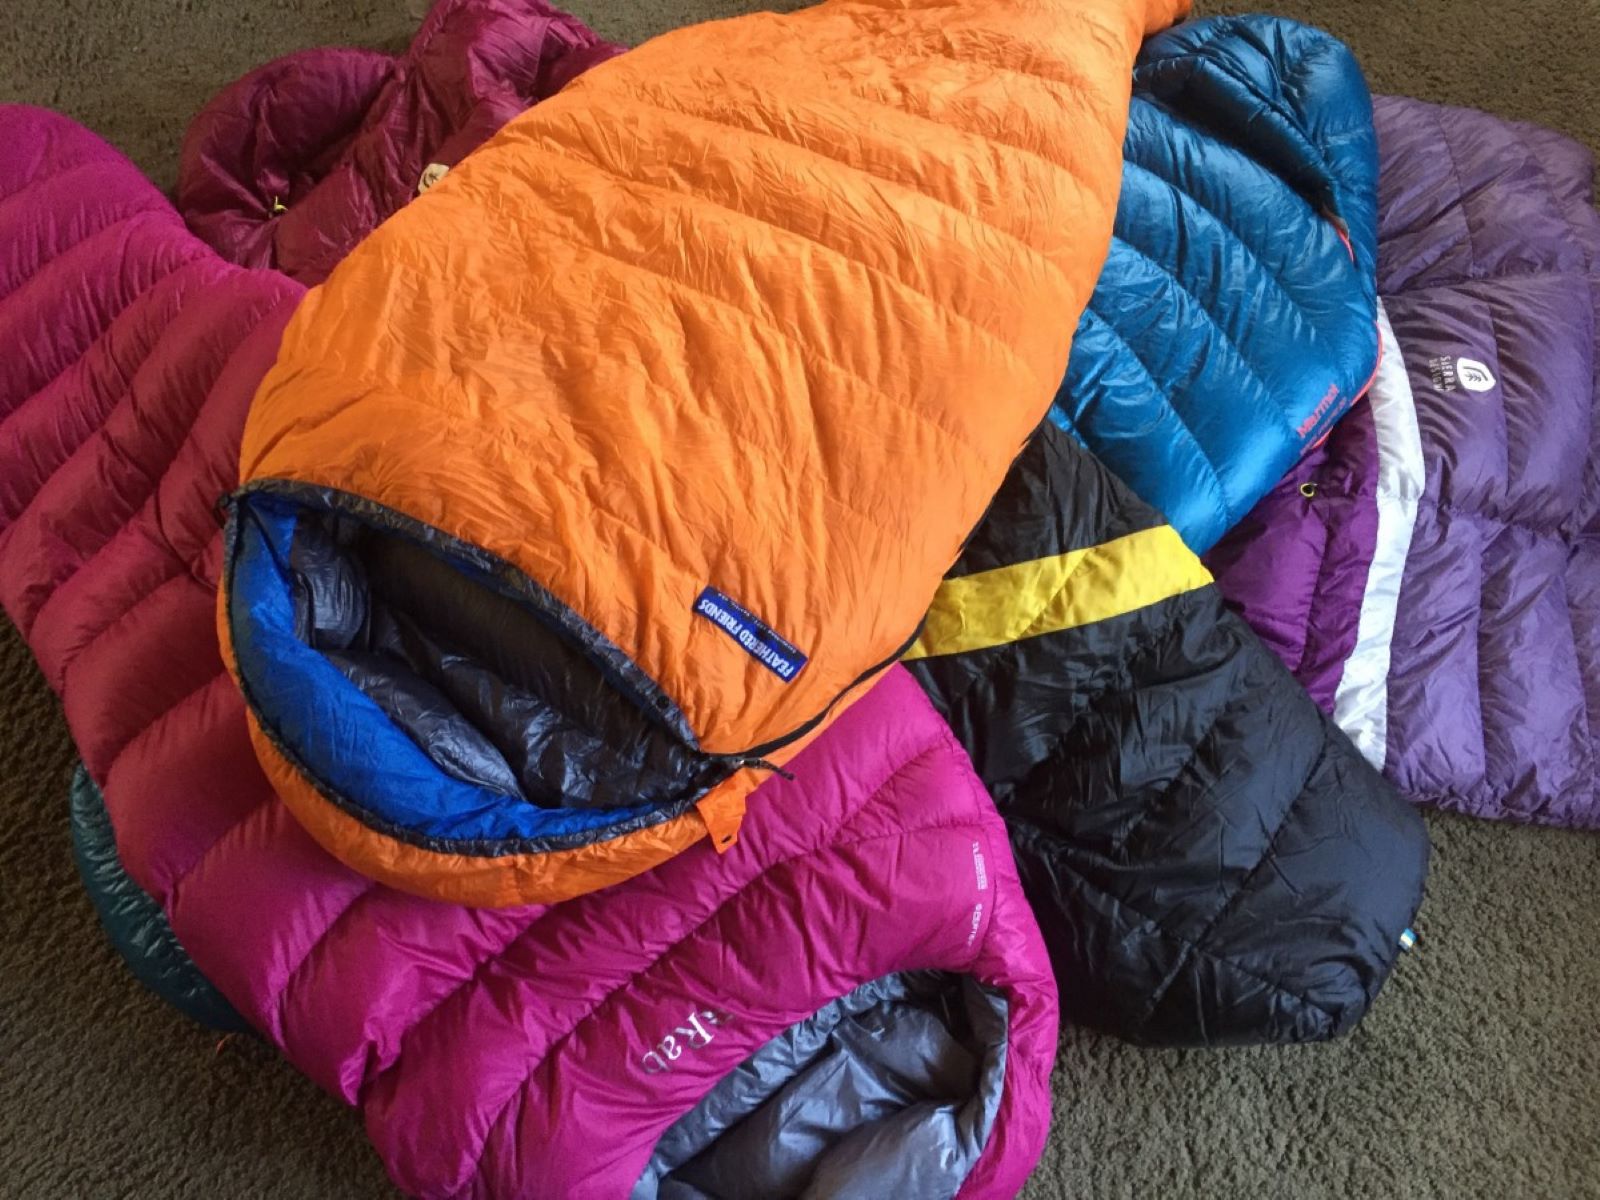 How To Store Sleeping Bags